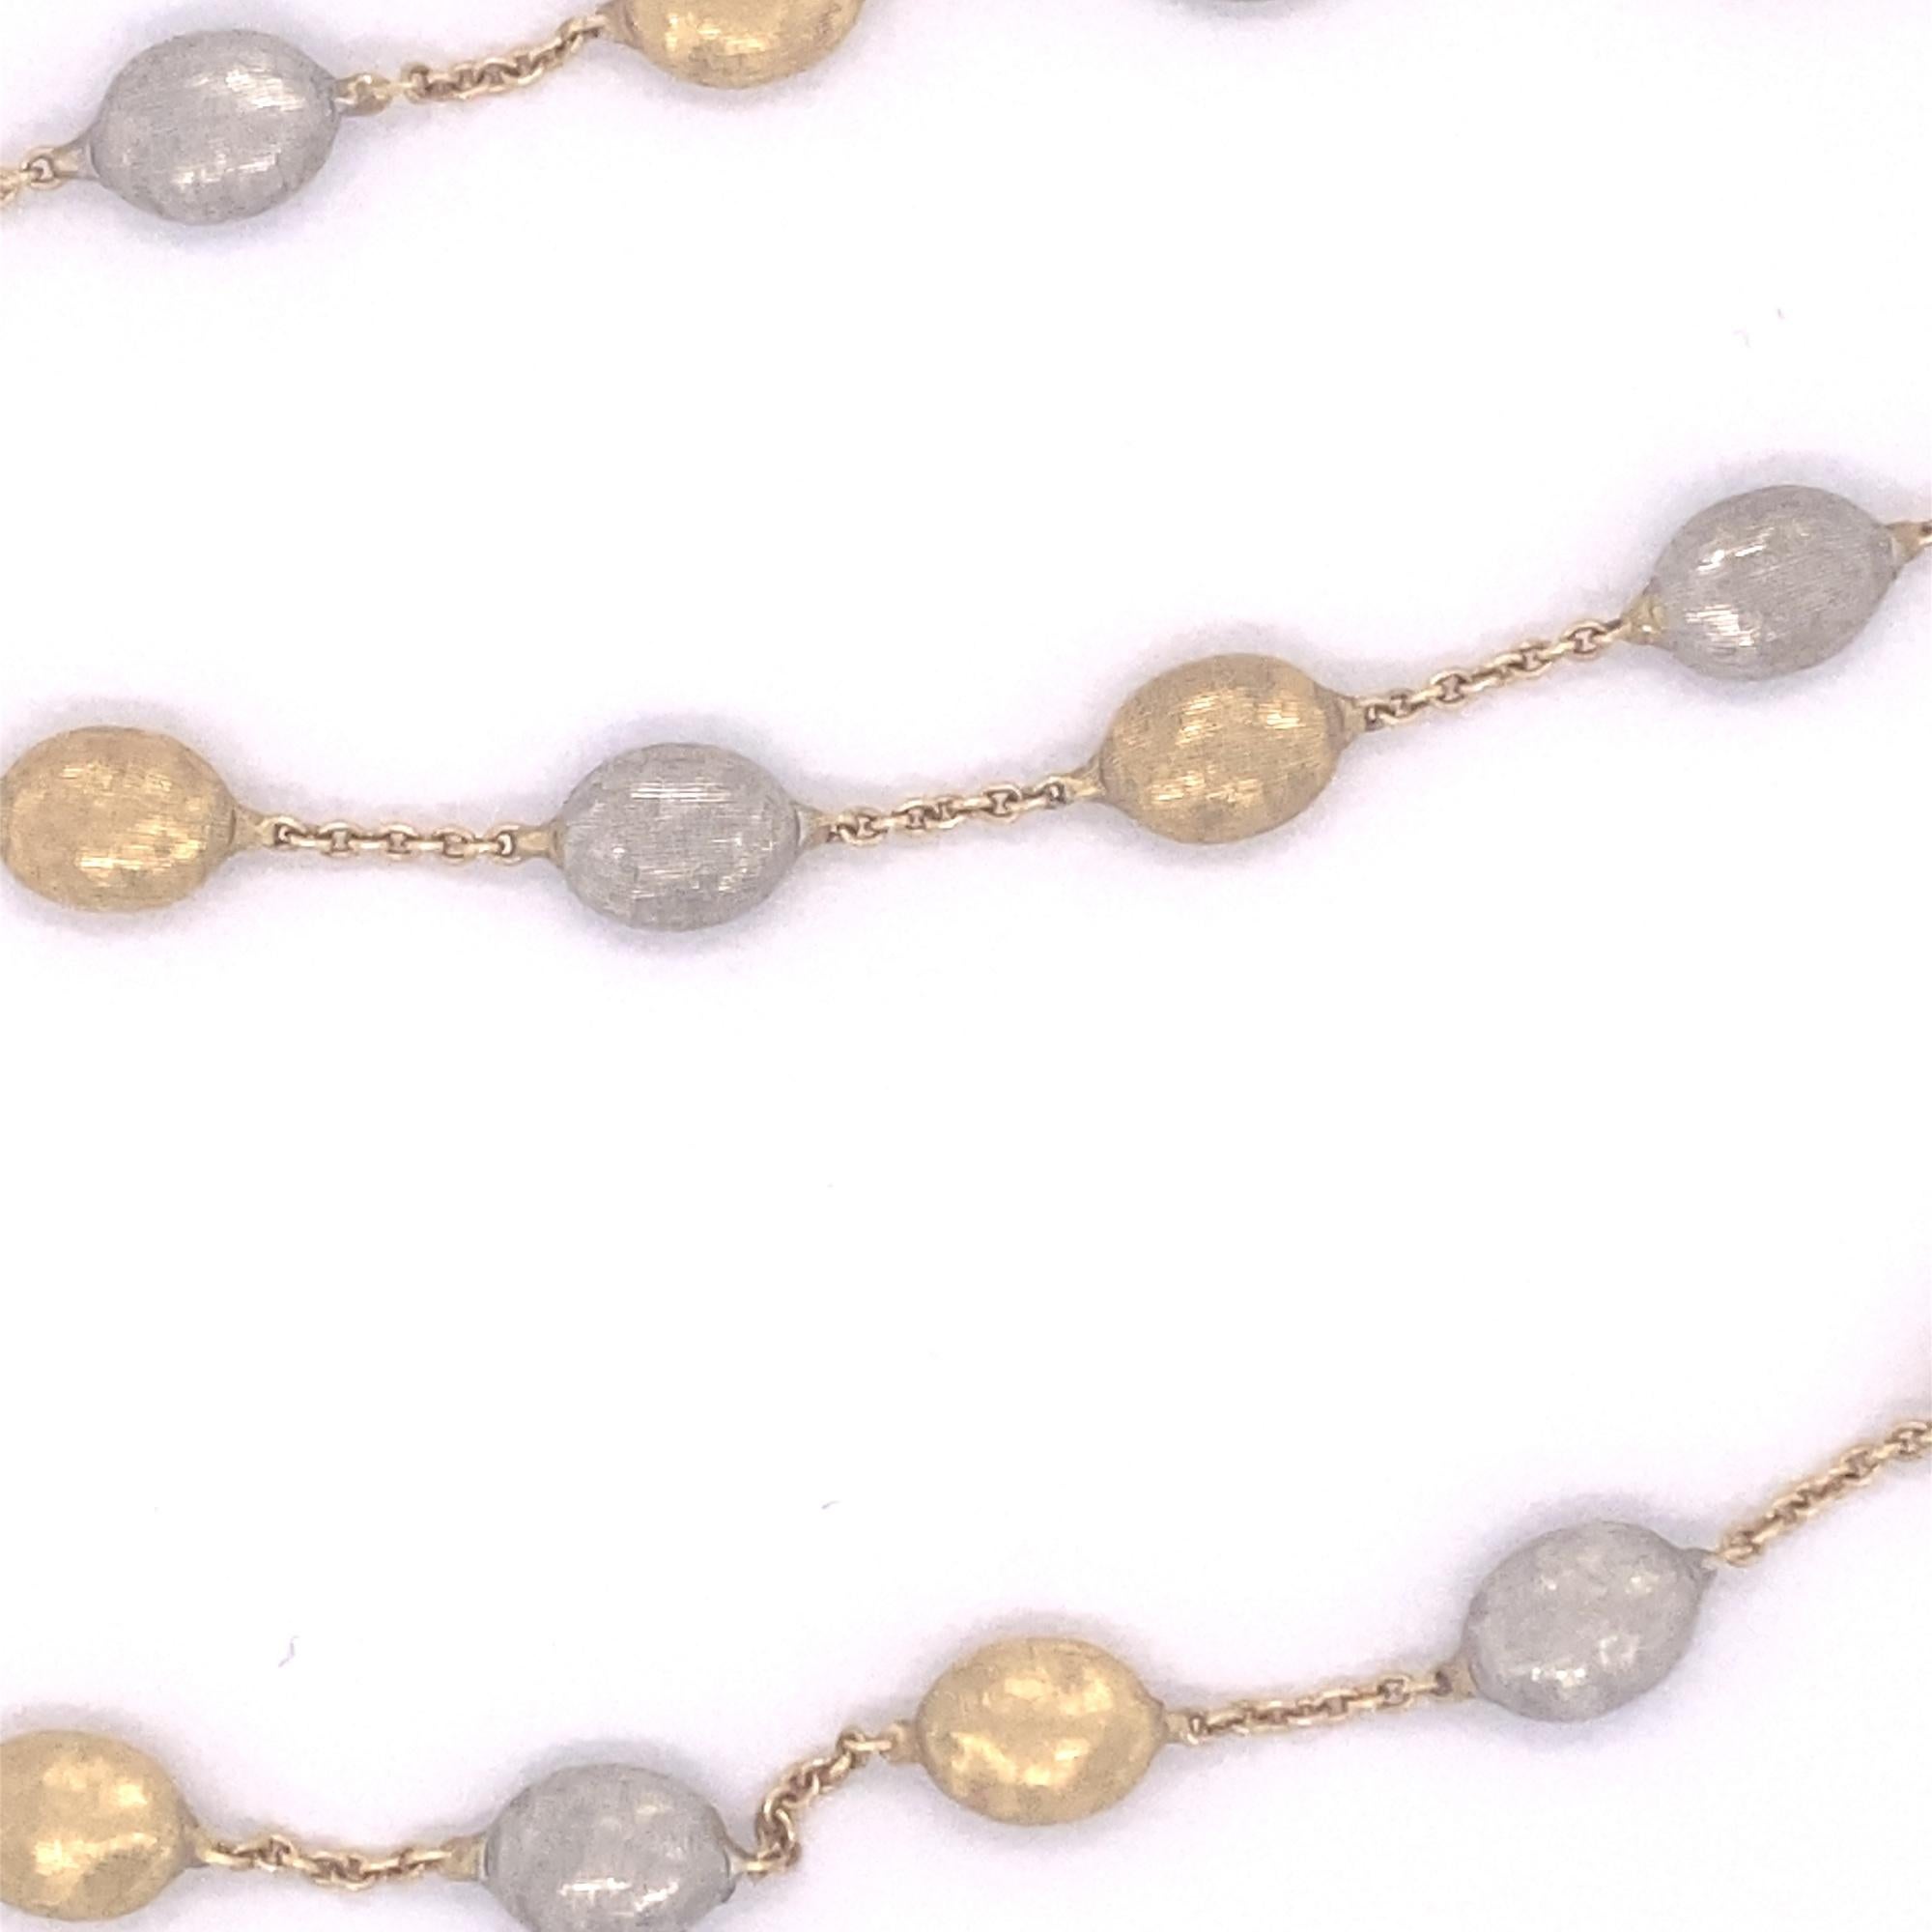 This is a beautiful designer Marco Bicego Siviglia multicolor 18K gold necklace. The necklace has 21 baroque etched gold beads in alternating white and yellow gold. The necklace measures 16 1/8